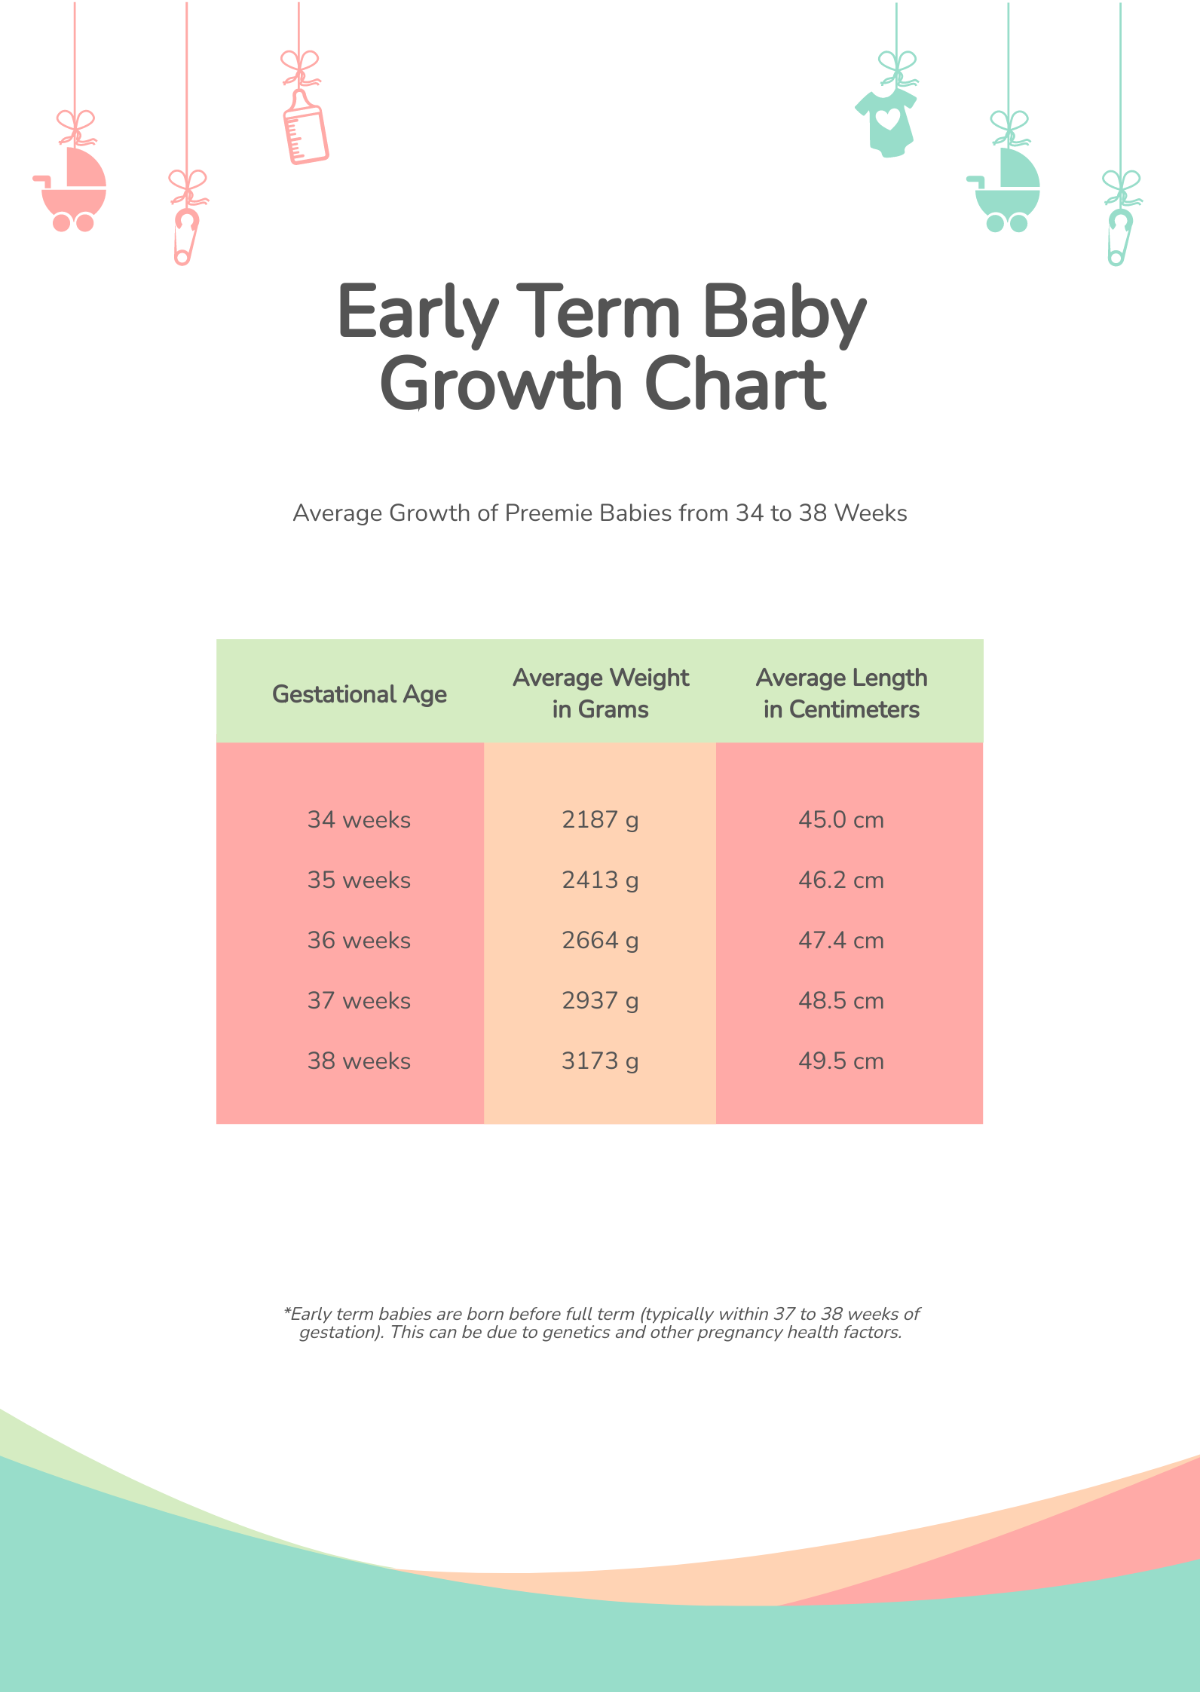 Early Term Baby Growth Chart Template